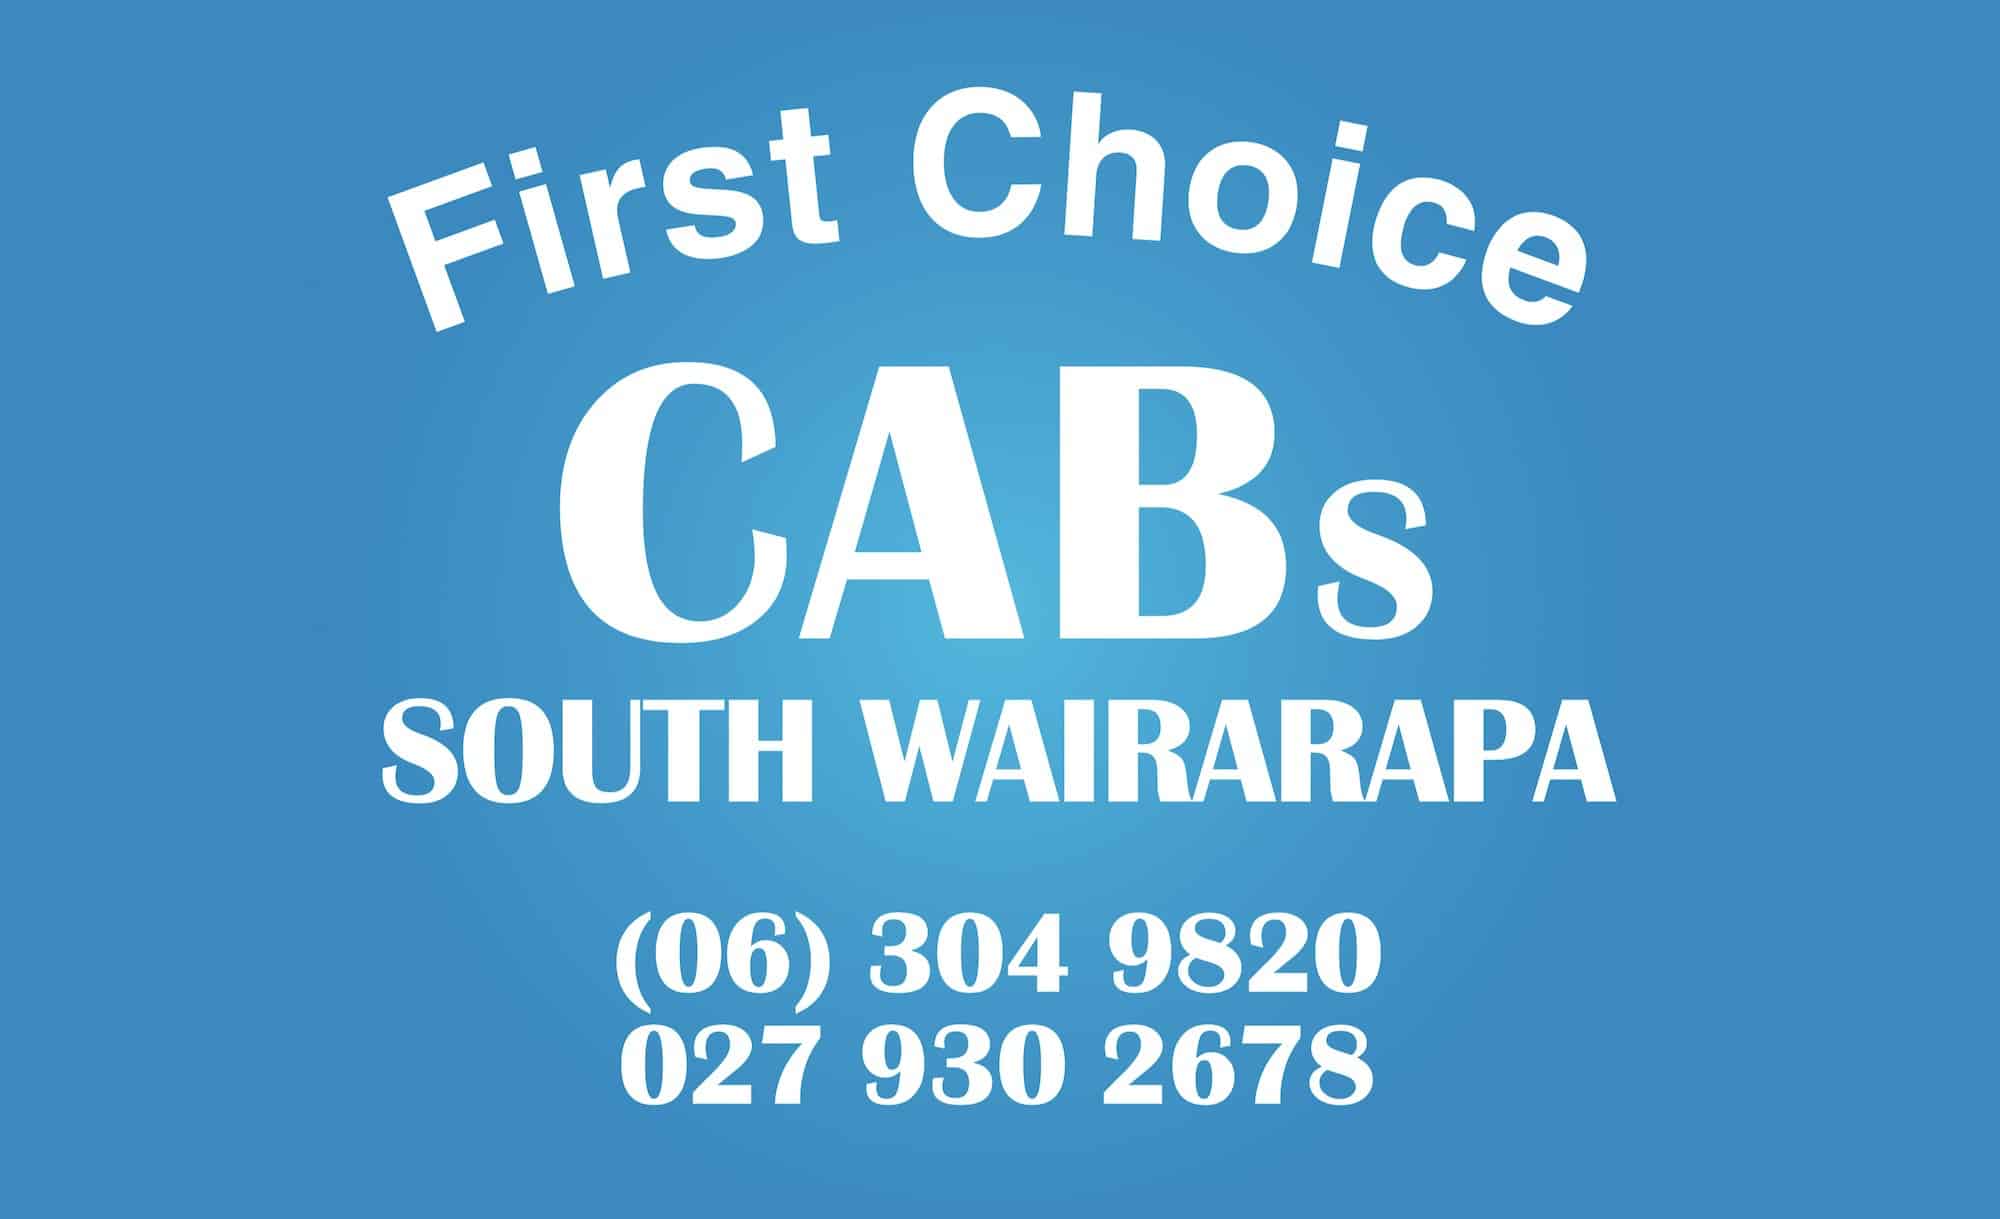 First Choice Cabs